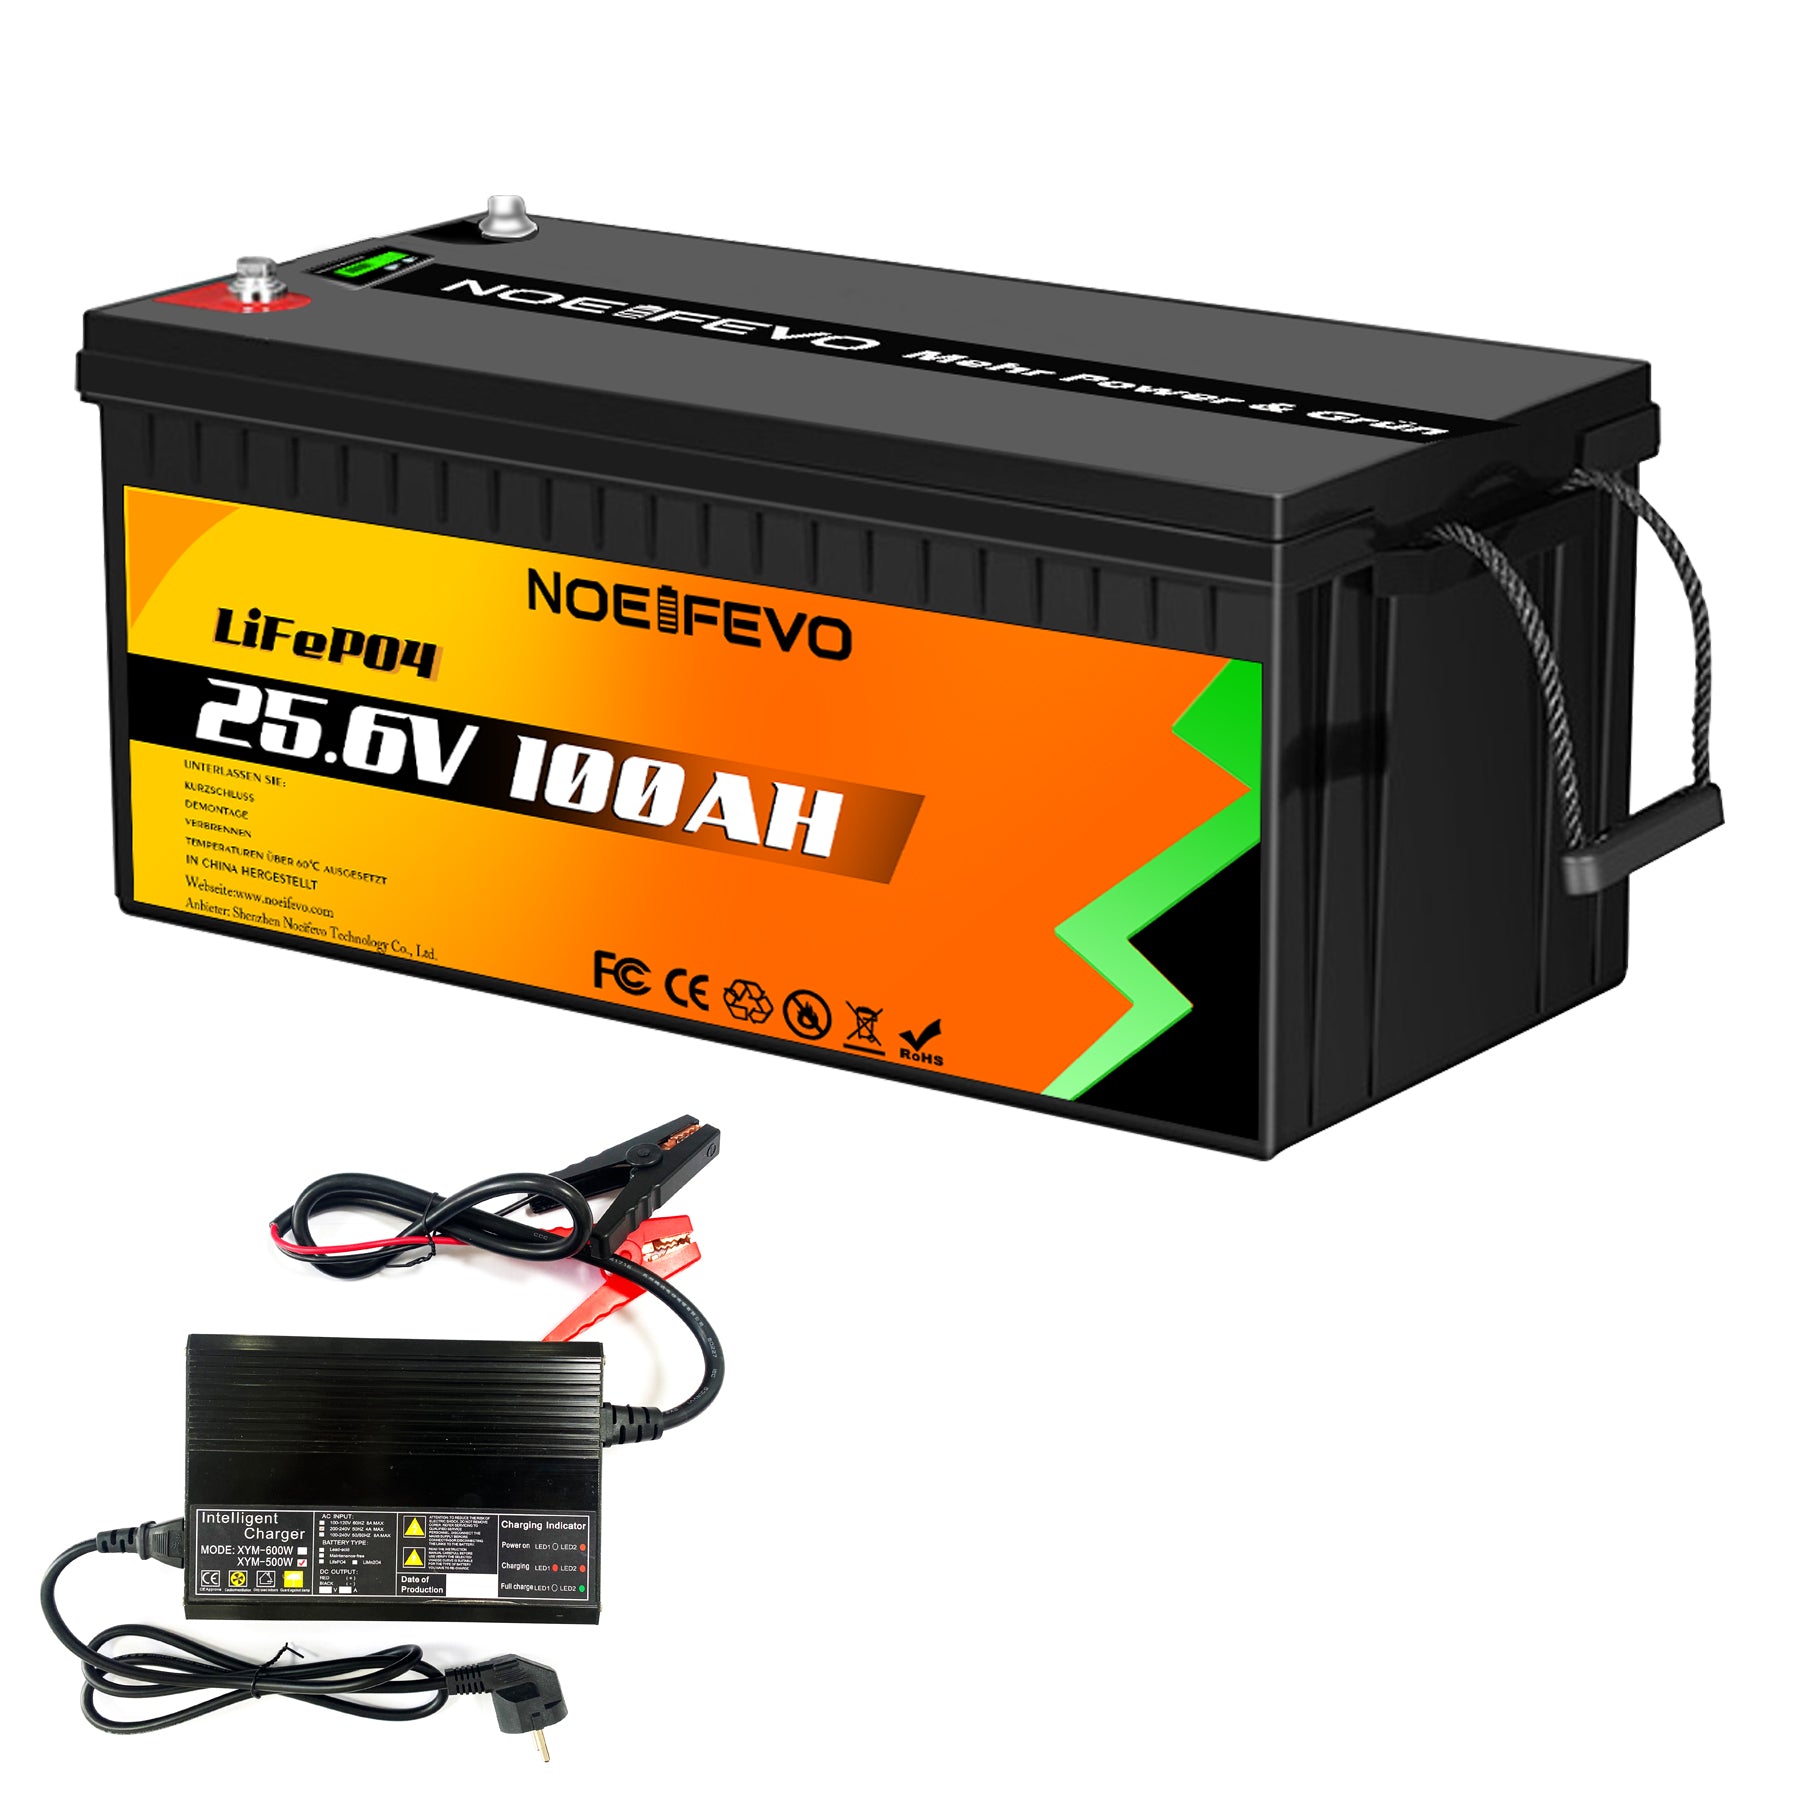 Litime 12V 100Ah LiFePO4 Lithium Battery 100A BMS for RV Off-grid